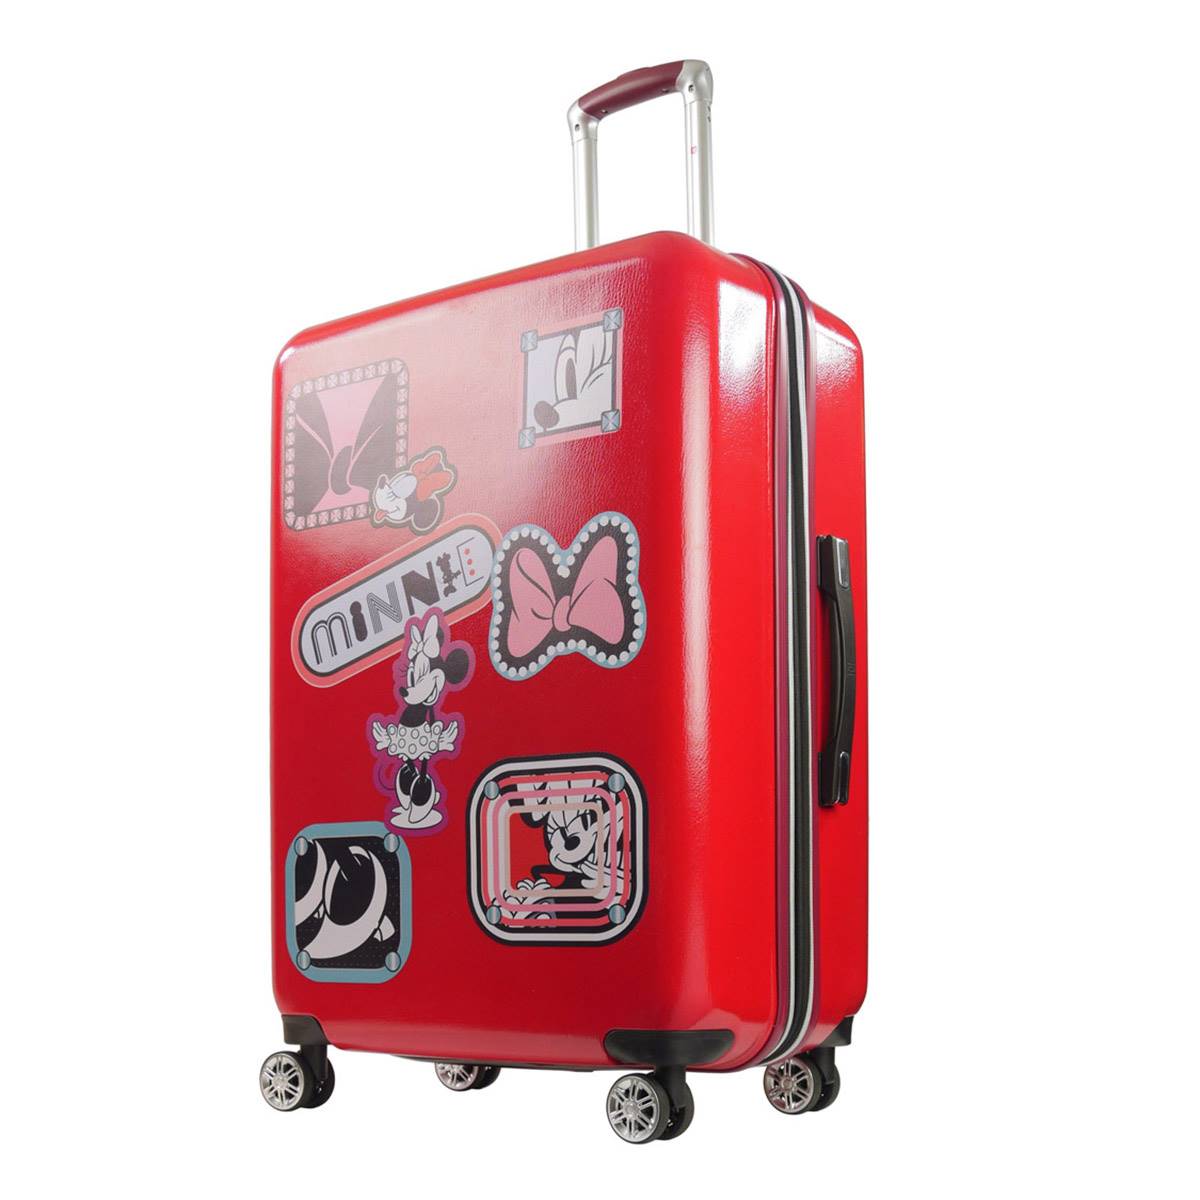 FUL Minnie Mouse 29in. Patch Design Hardside Luggage